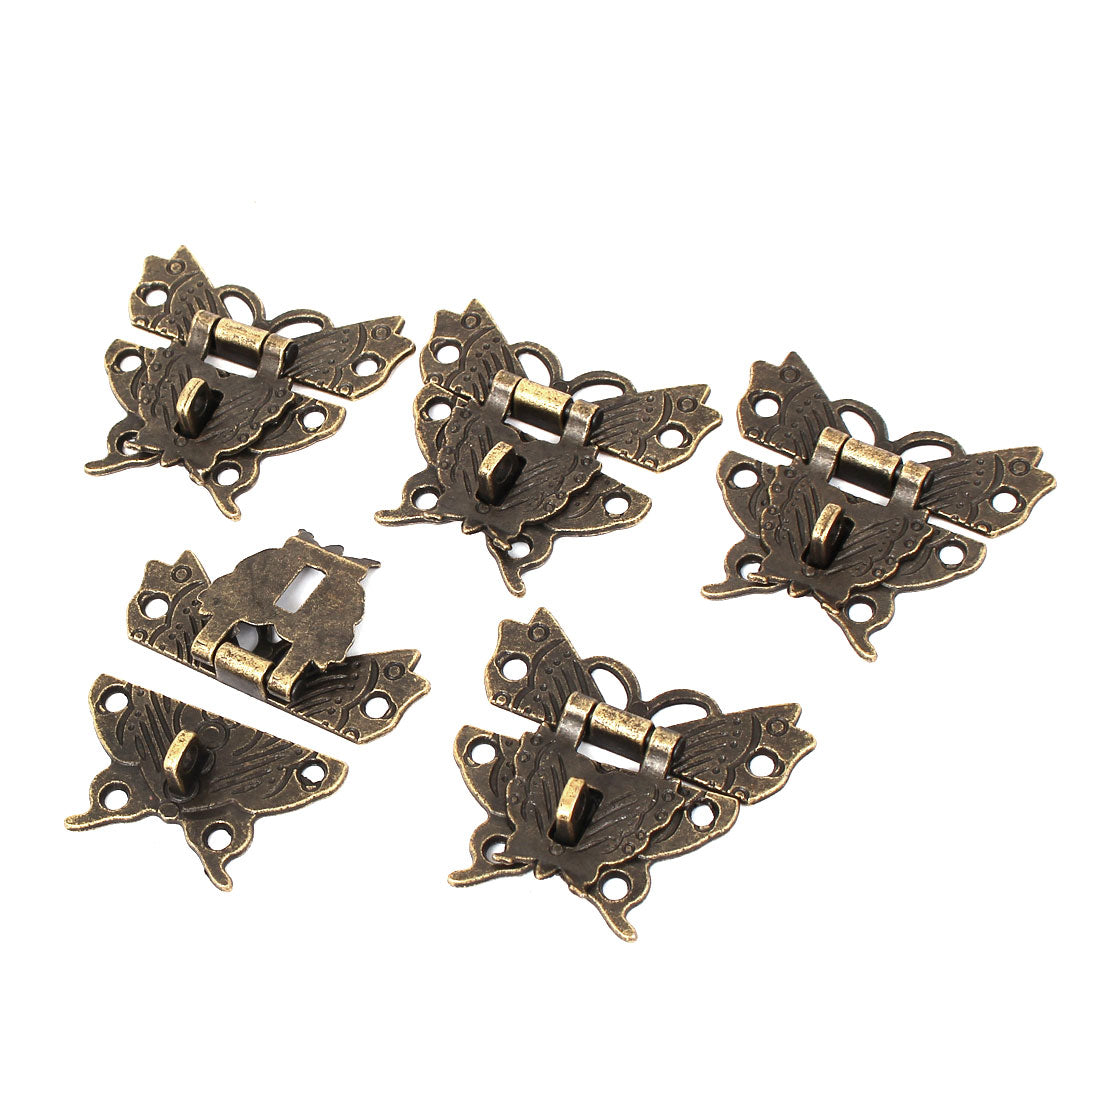 uxcell Uxcell Wooden Case Box Butterfly Shape Hasp Lock Latch Bronze Tone 5pcs